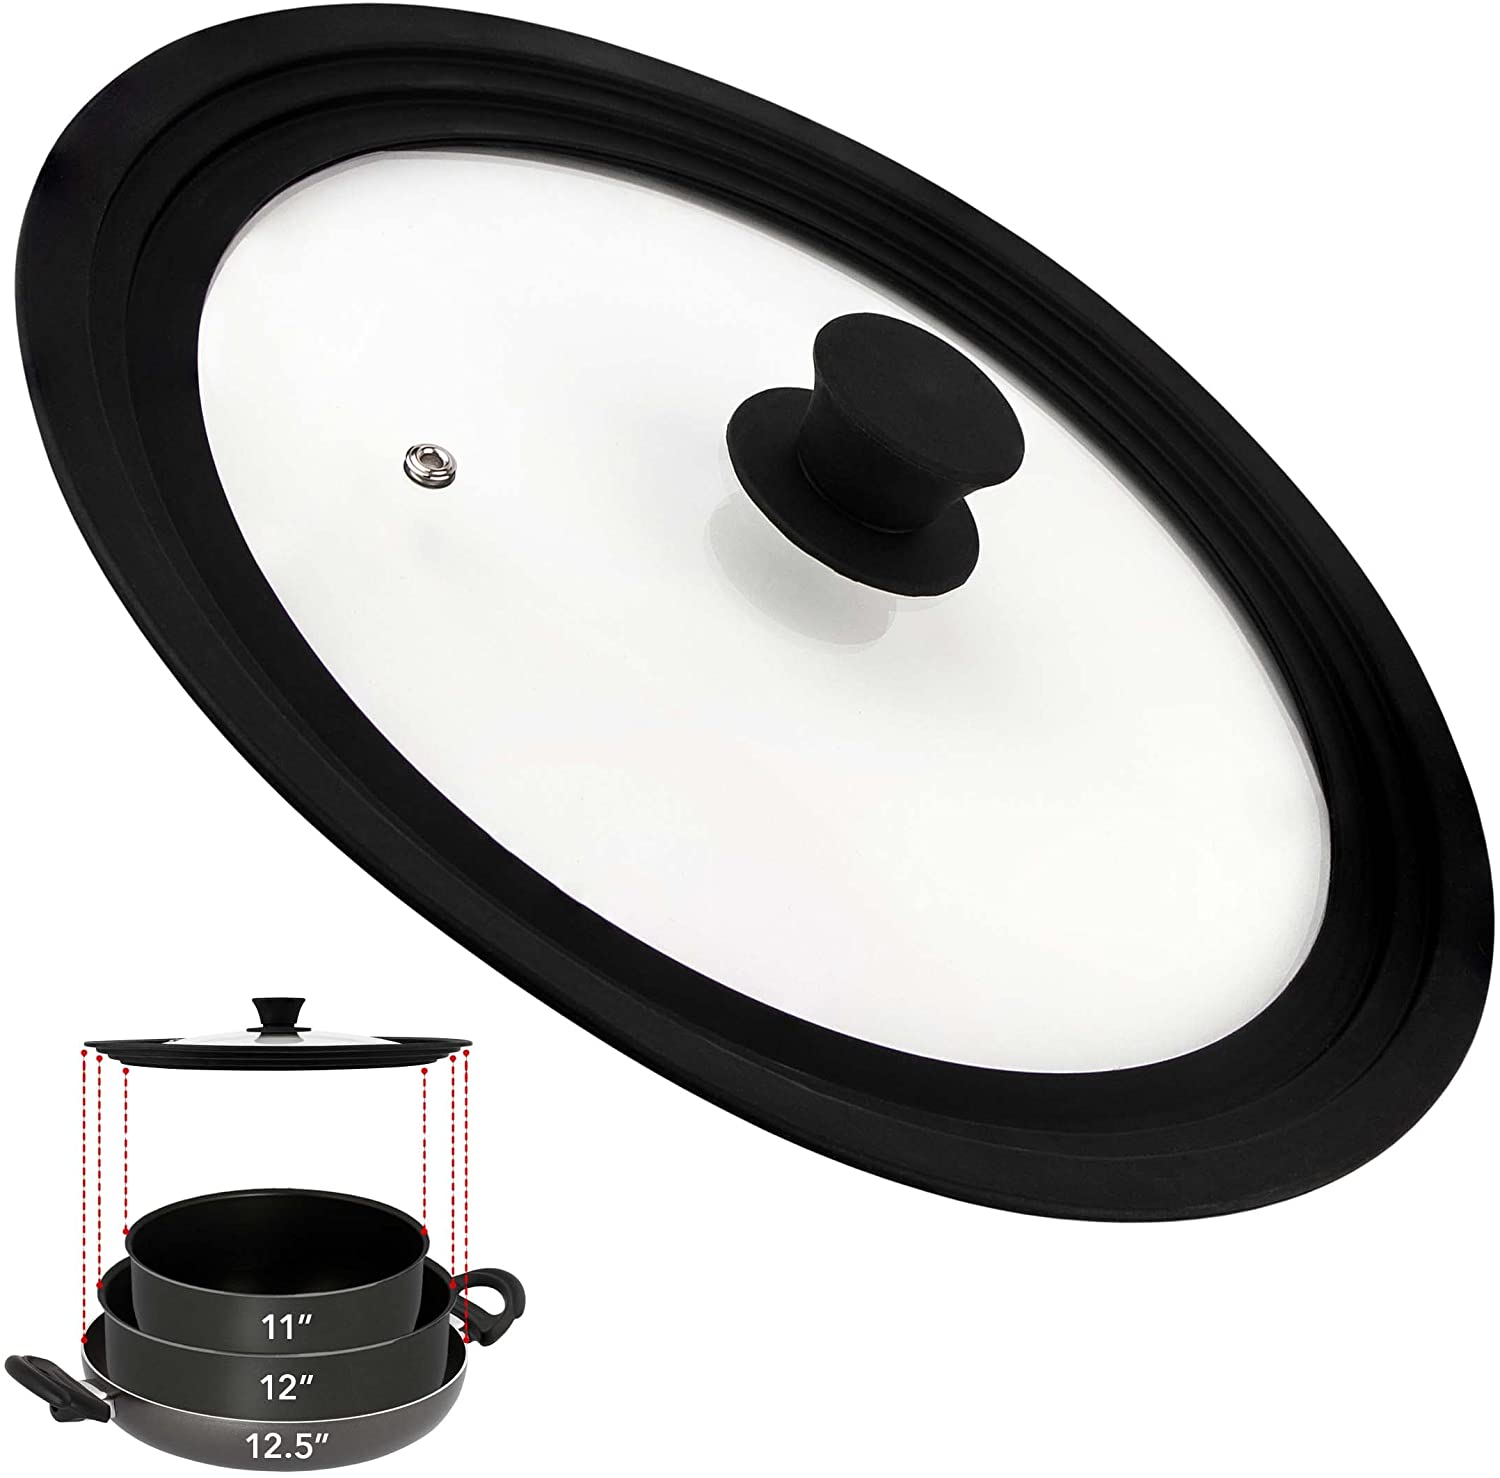 Universal Lids For Pots, Pans And Frying Pans - Tempered Glass